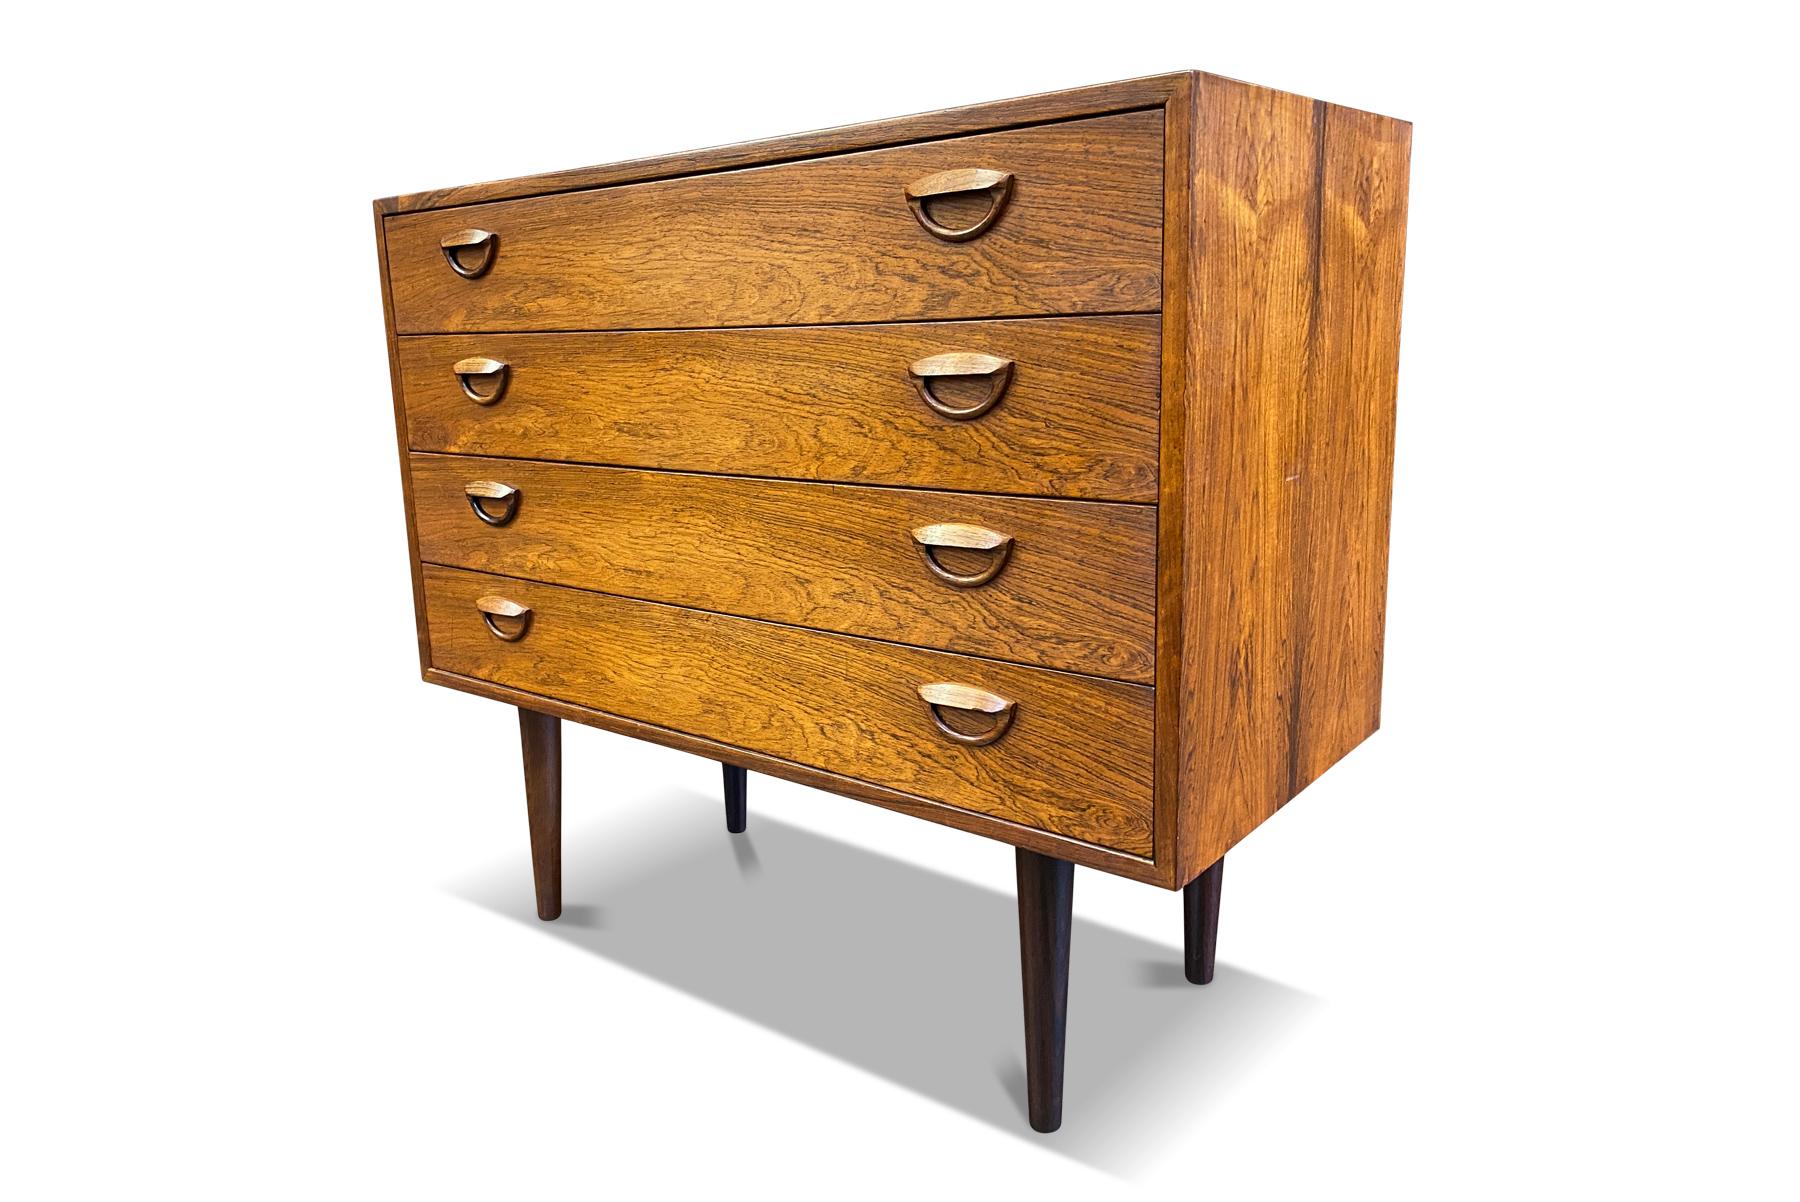 This handsome Danish modern Kai Kristiansen for Feldballes Møbelfabrik gentleman’s chest in Brazilian rosewood offers excellent storage. The four drawers are adorned with the designer’s signature “eye” pull. In excellent original